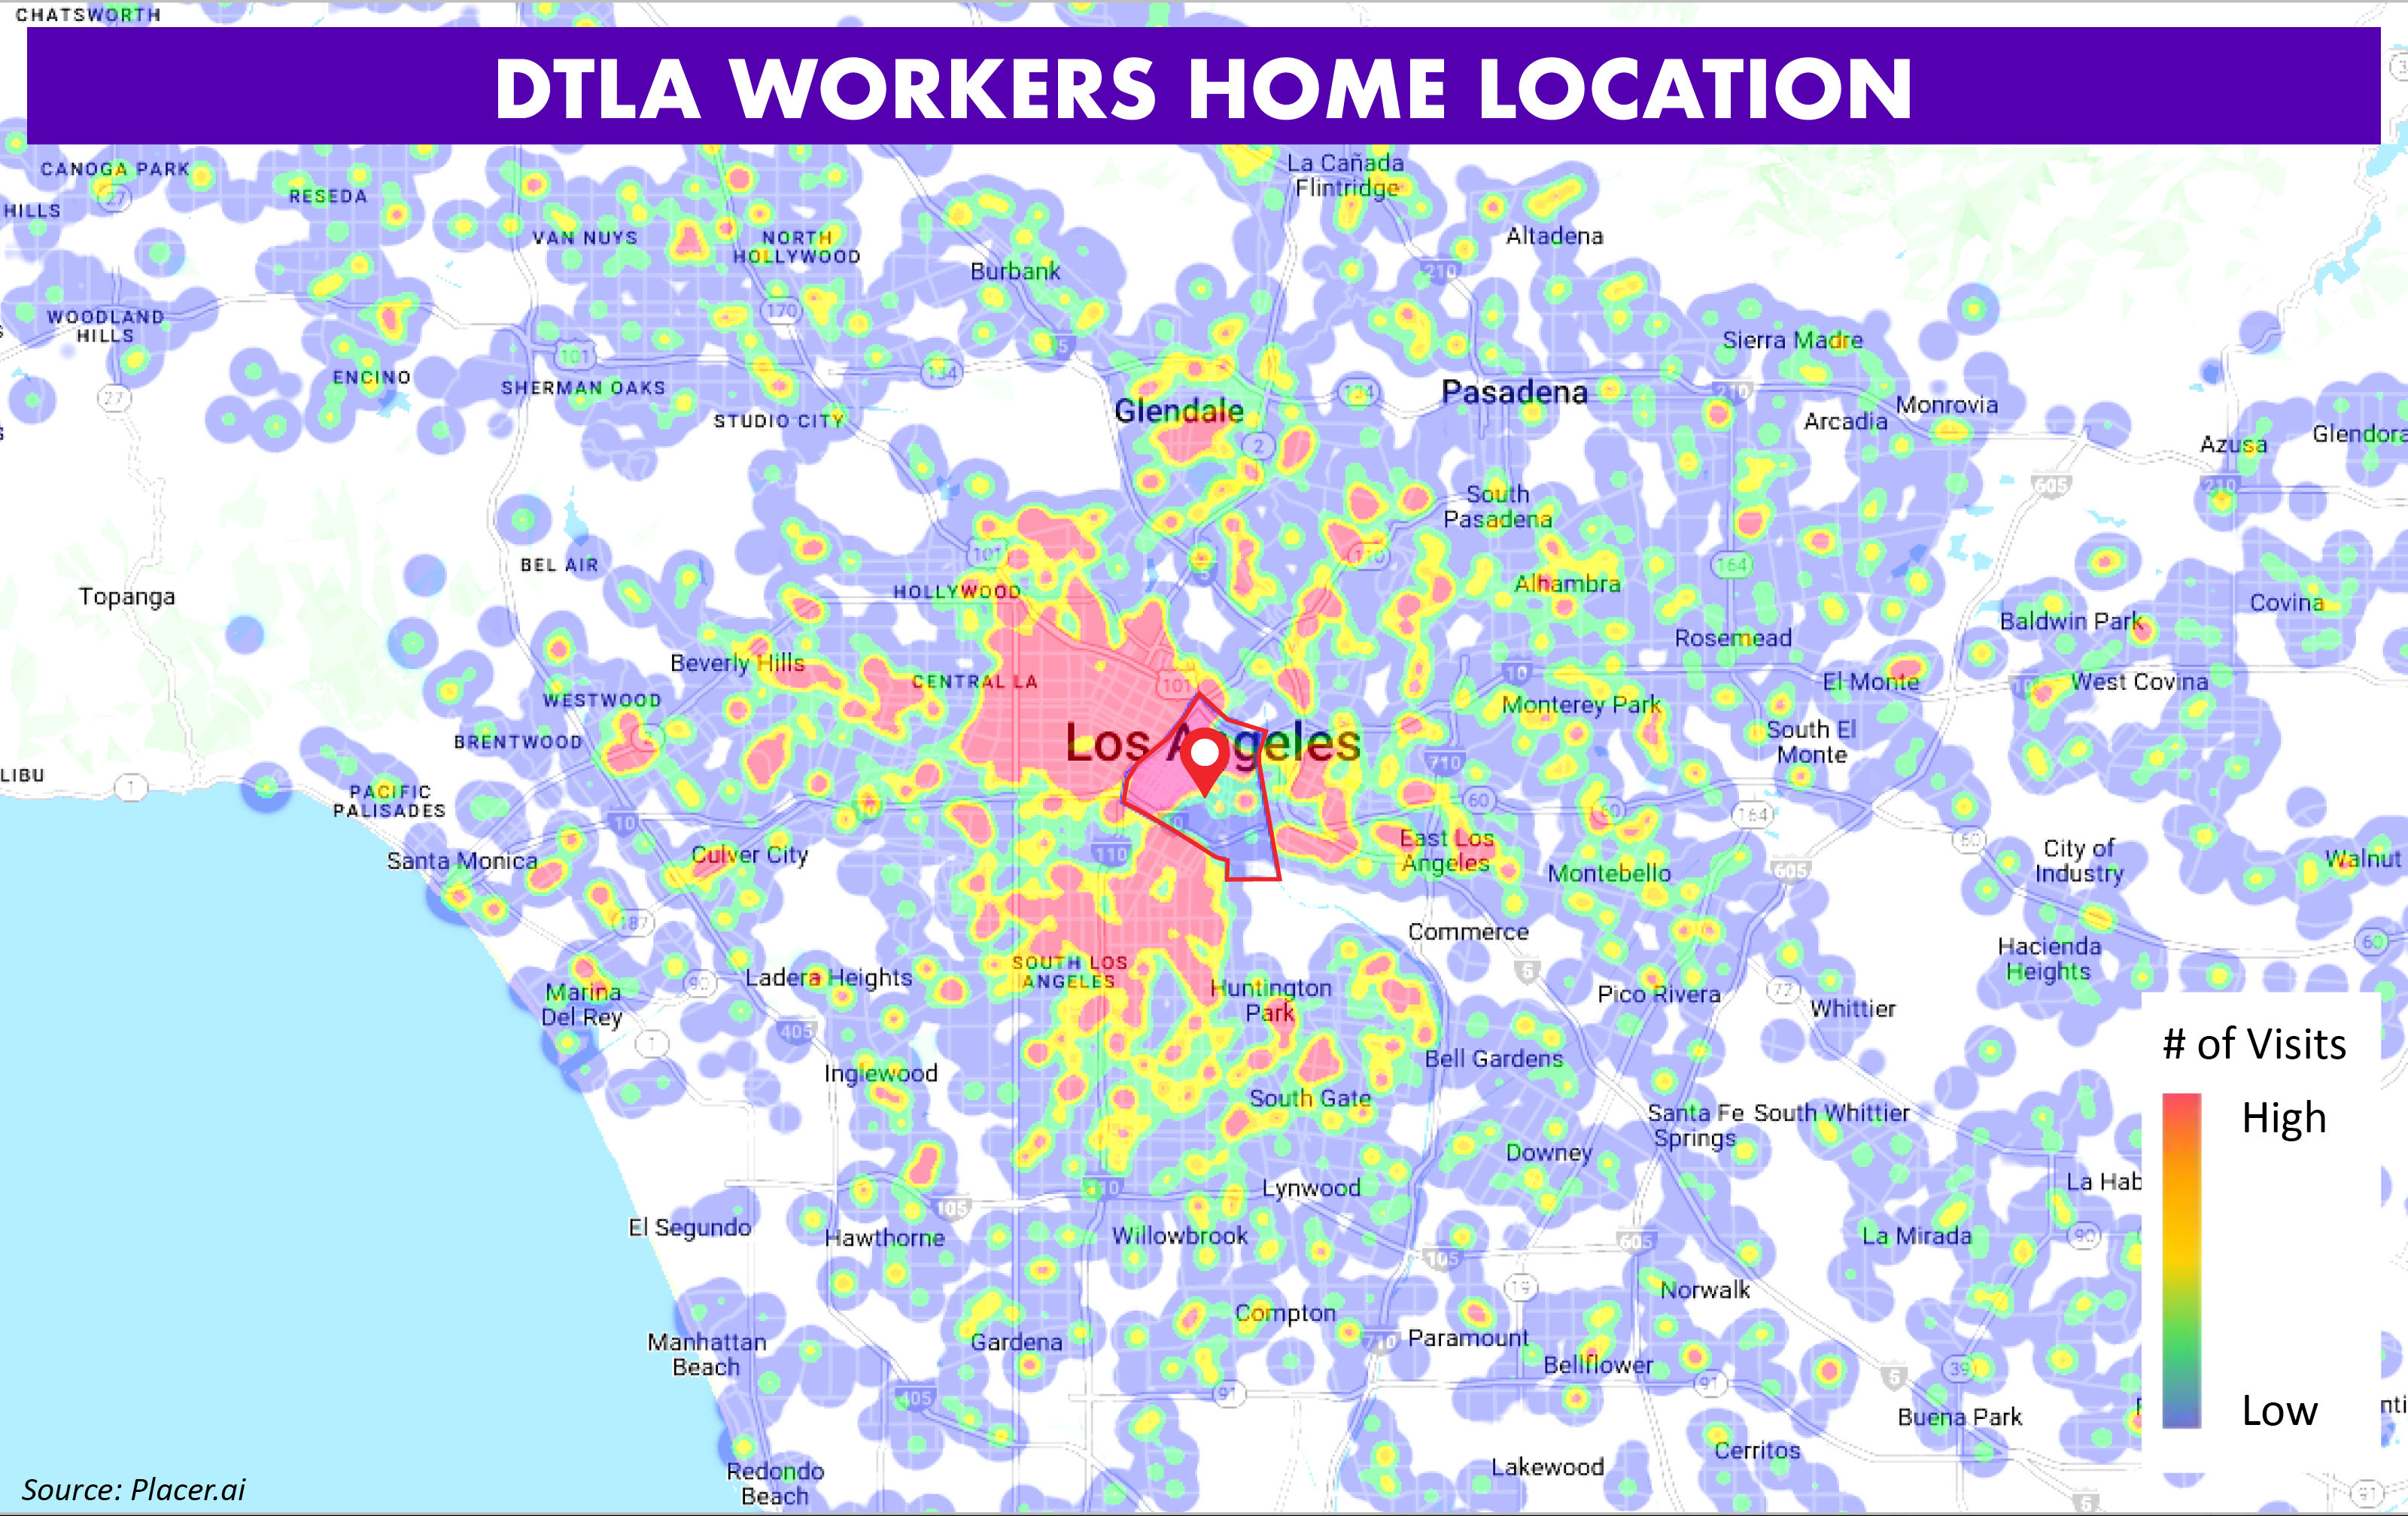 DTLA Workers Home Location Map